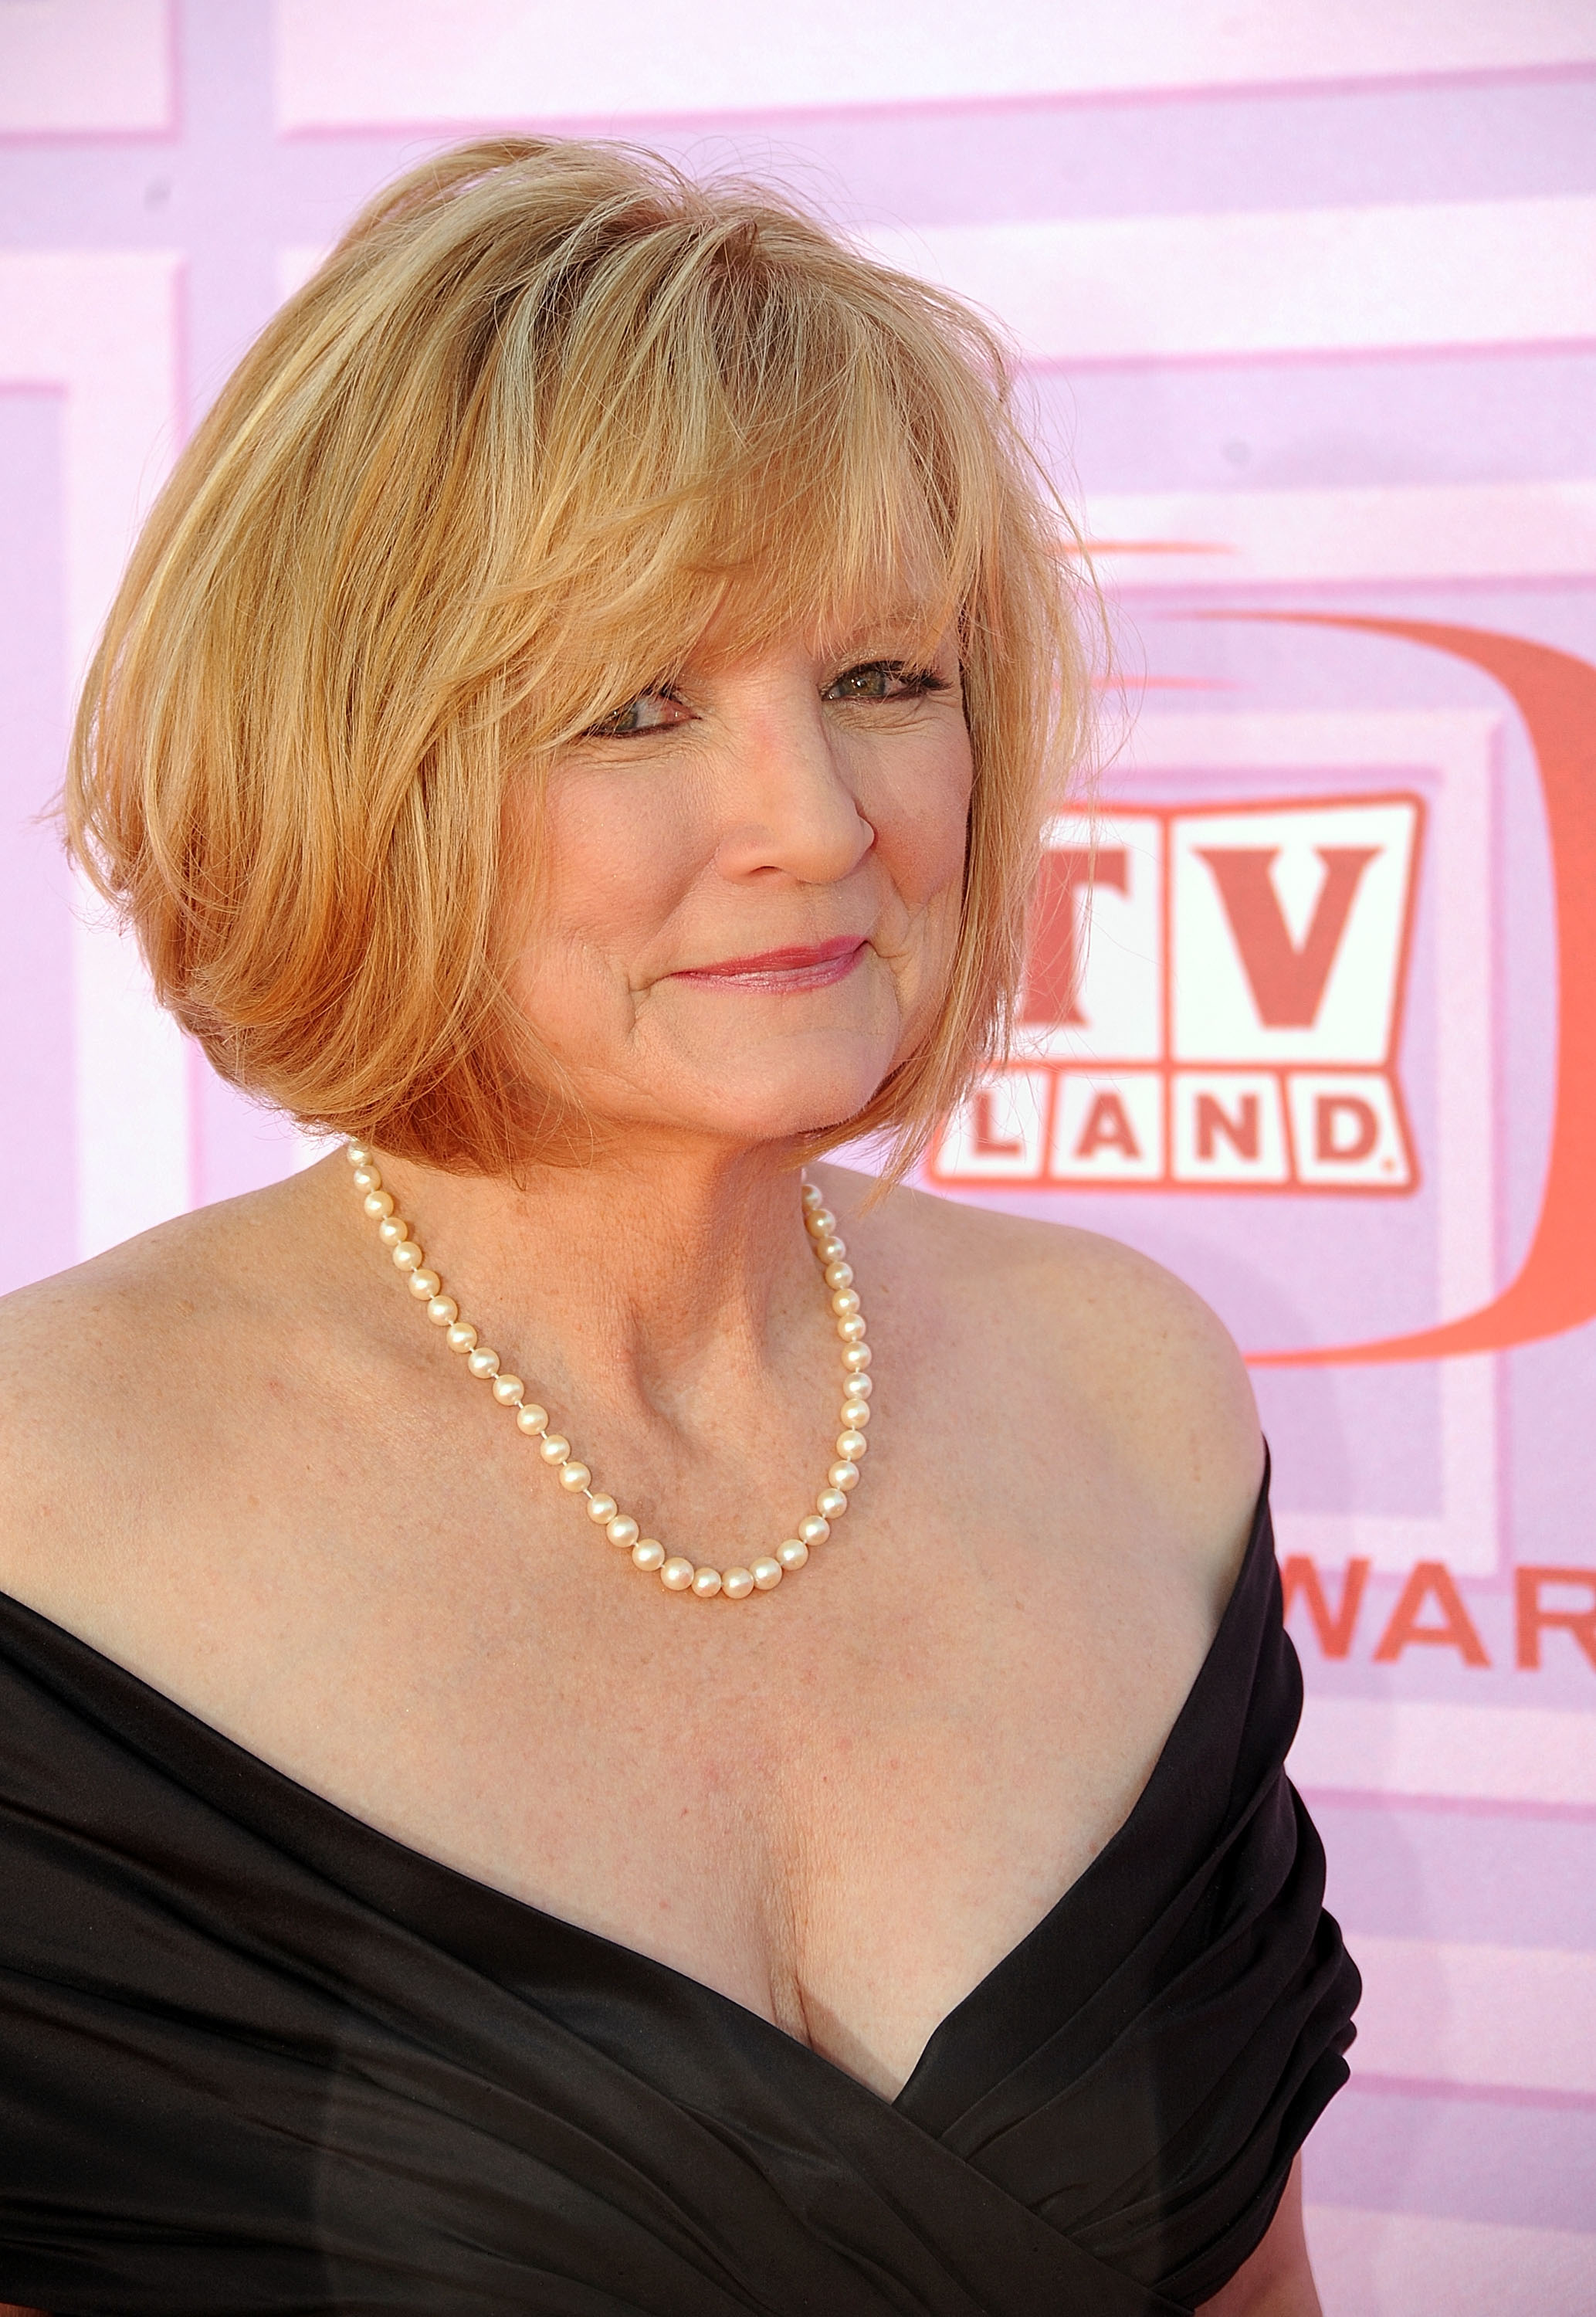 Constance McCashin at the 7th Annual TV Land Awards on April 19, 2009, in Universal City, California | Source: Getty Images